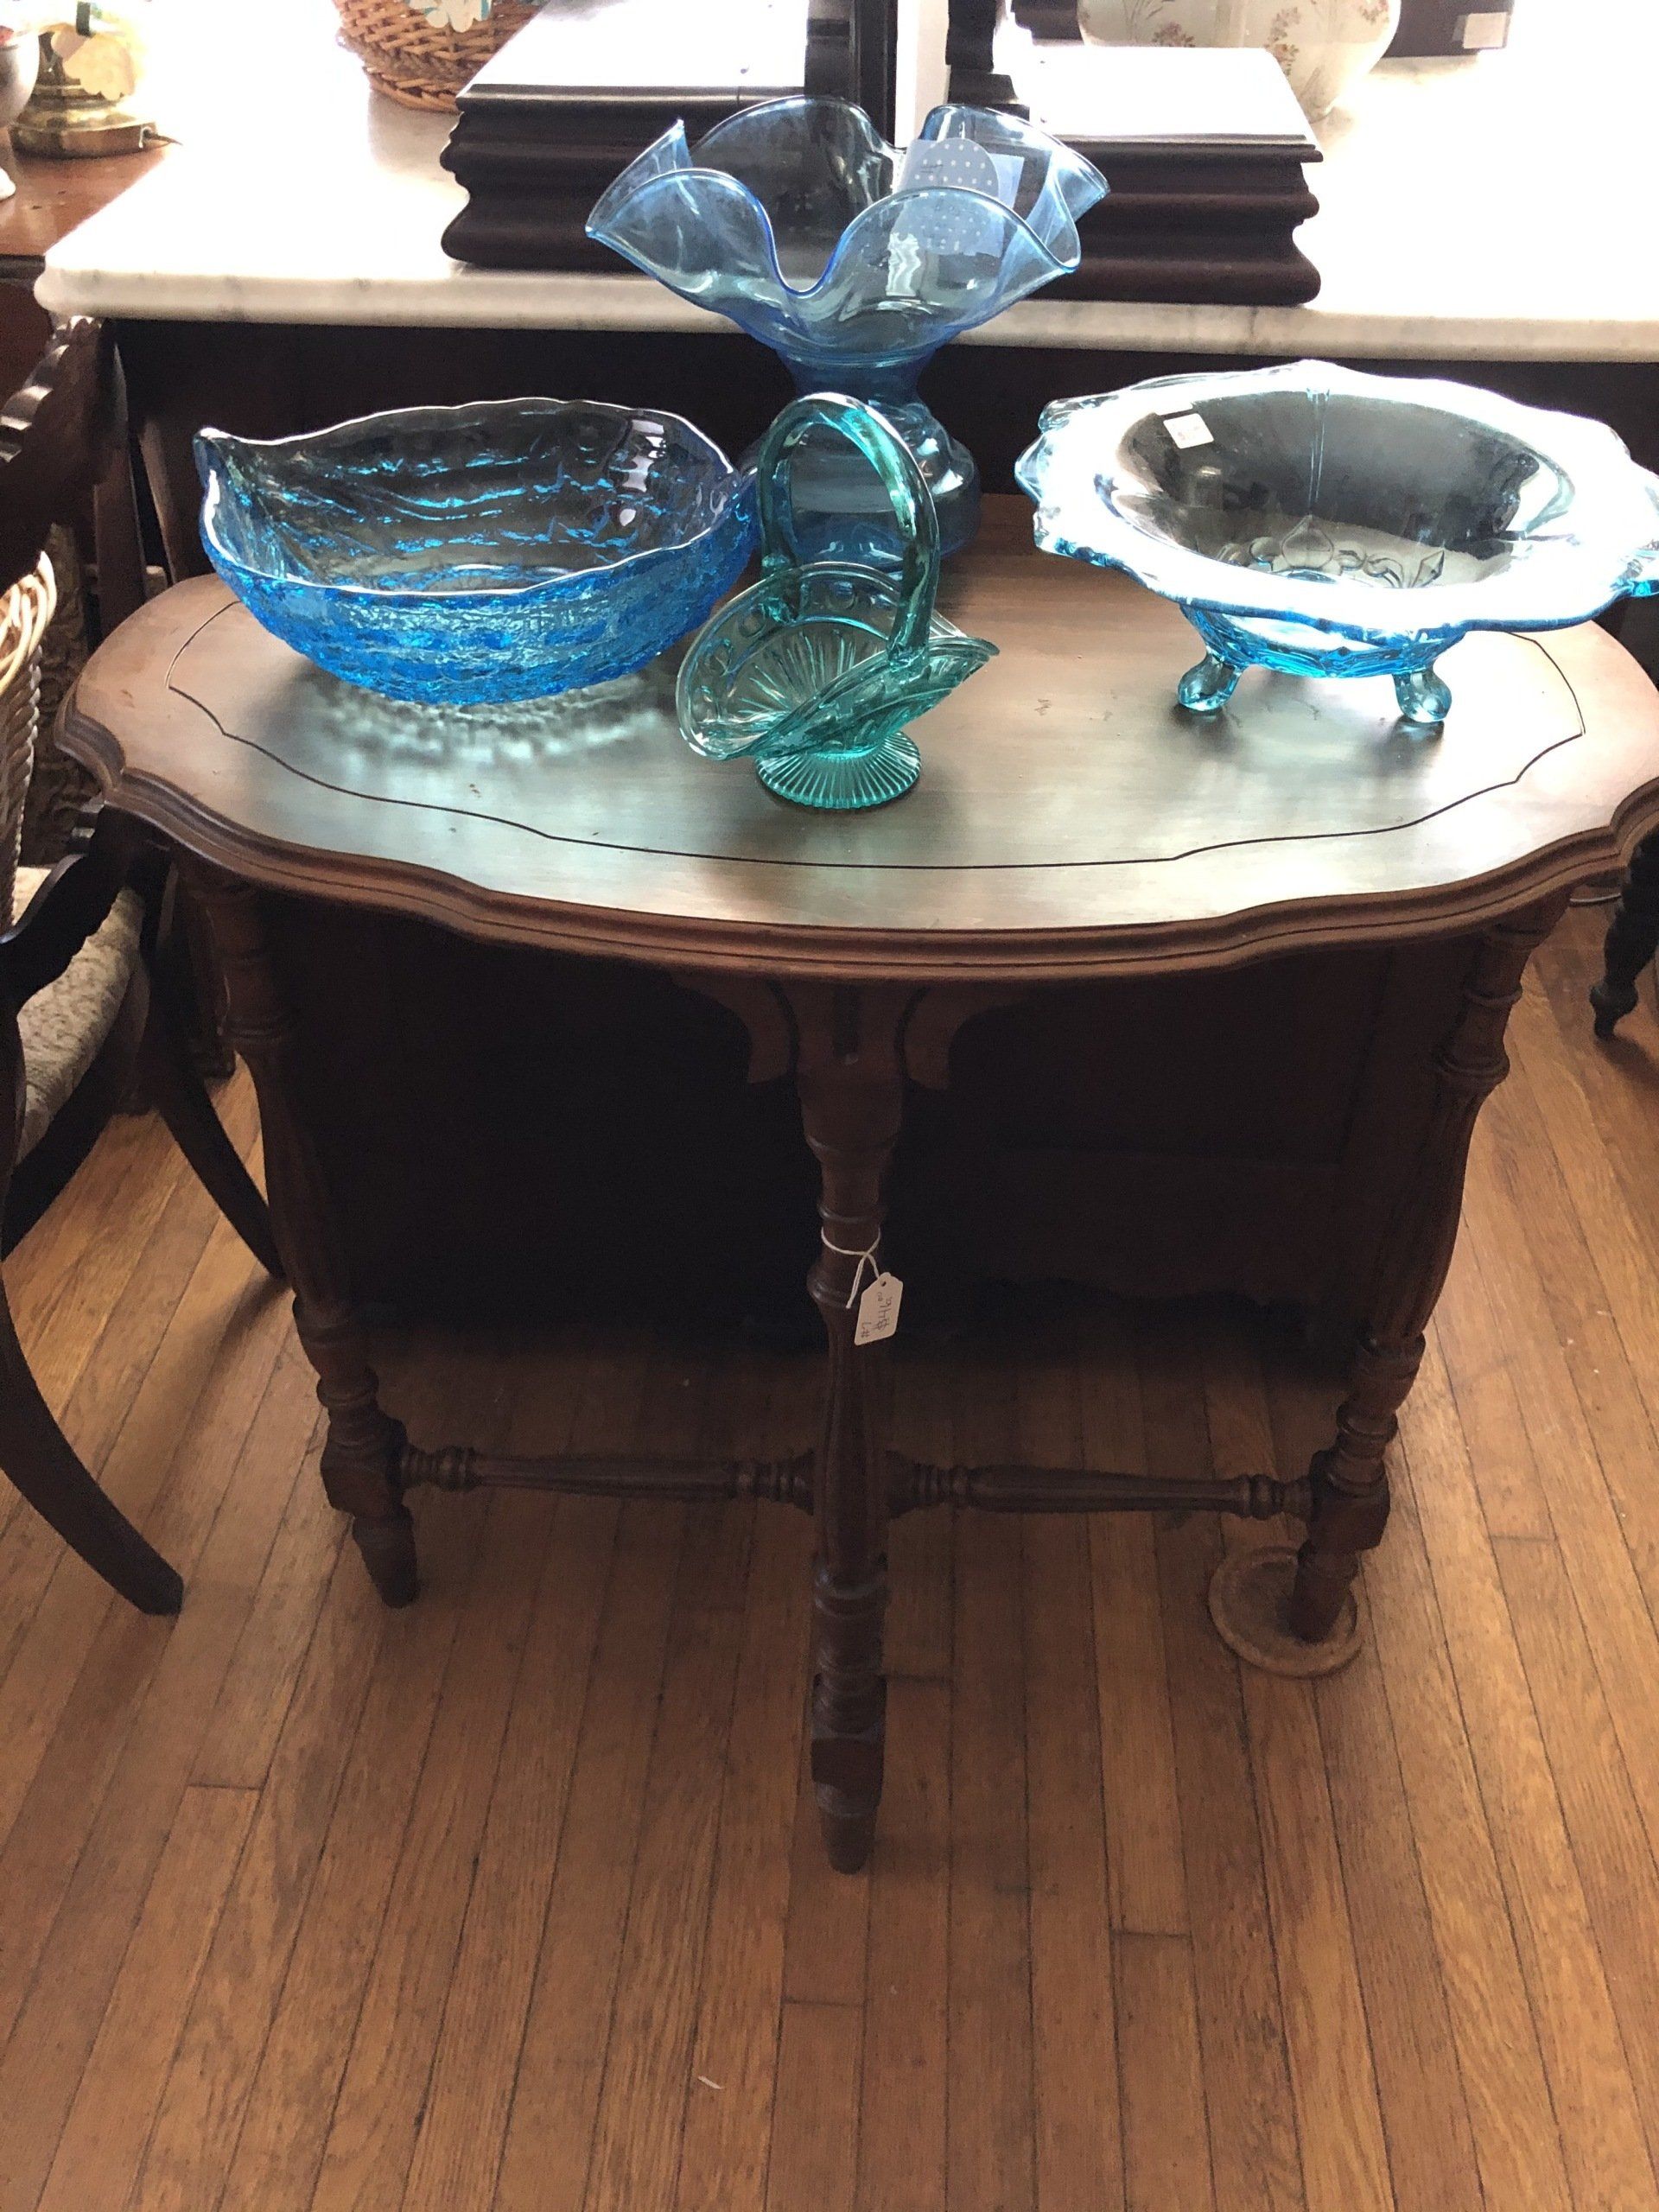 Vintage and Antique Furniture and Collectibles in Bouckville, New York